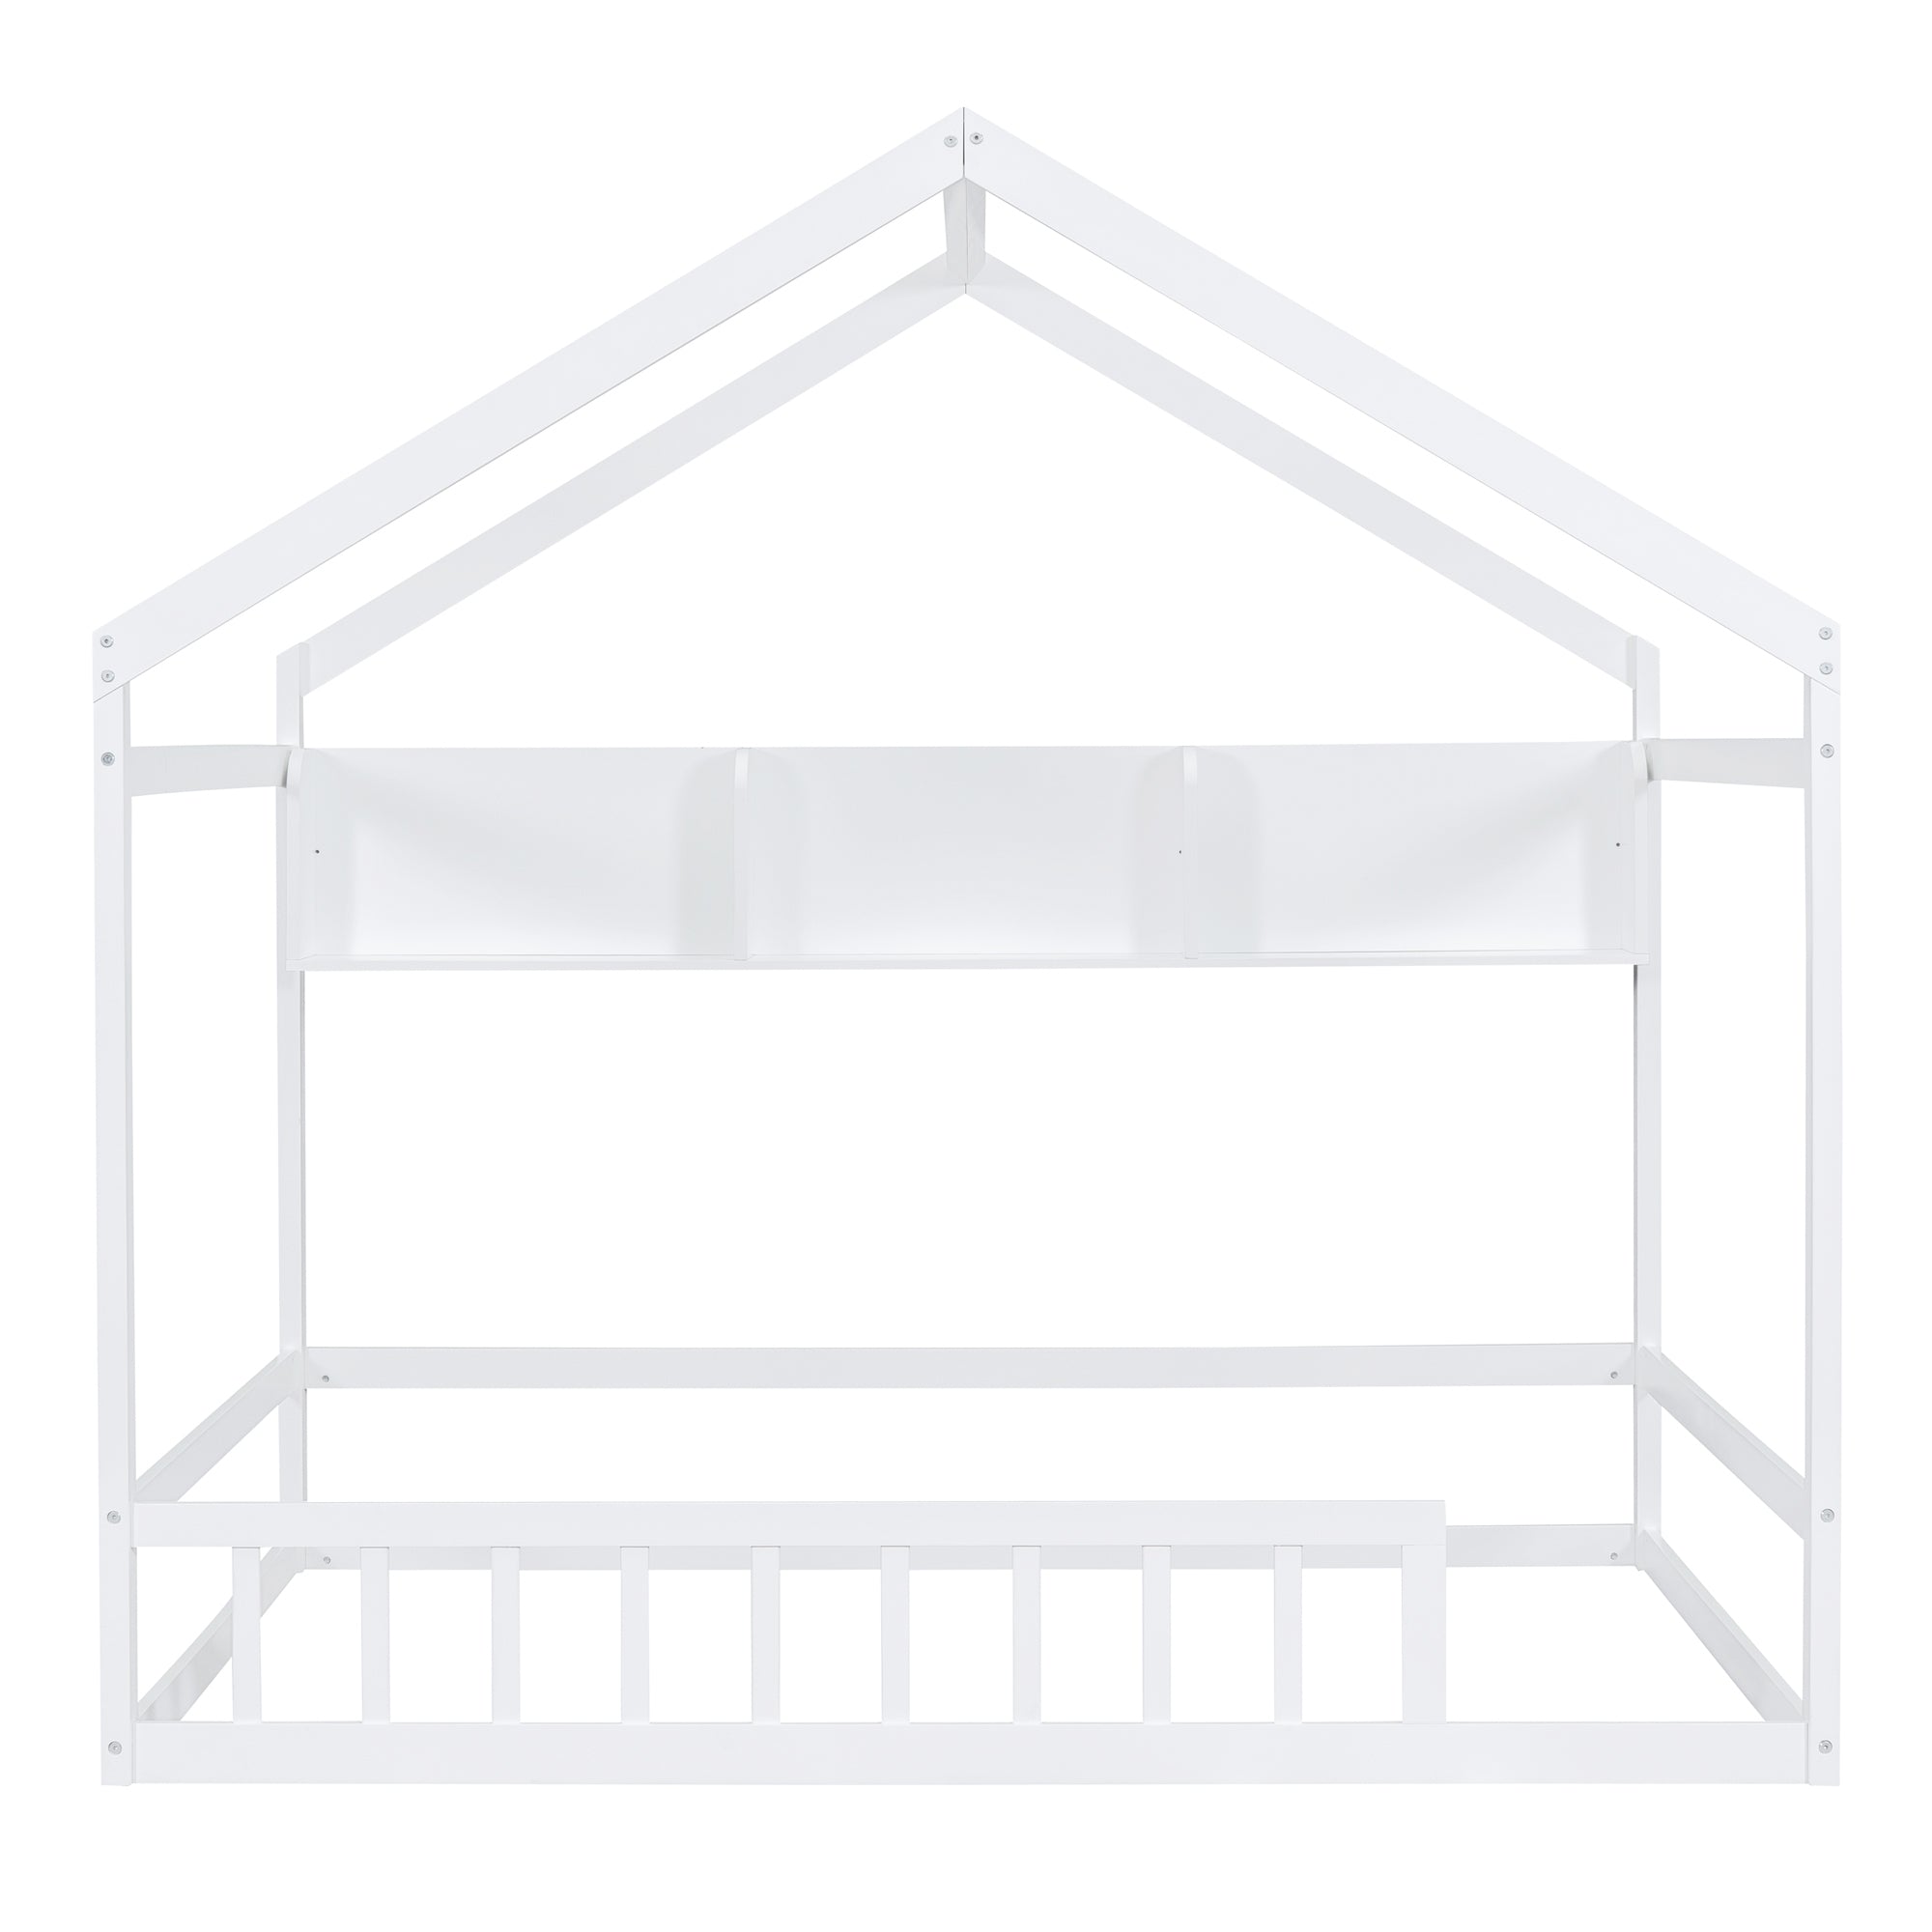 Wooden Full Size House Bed with Storage Shelf,Kids Bed full-white-wood